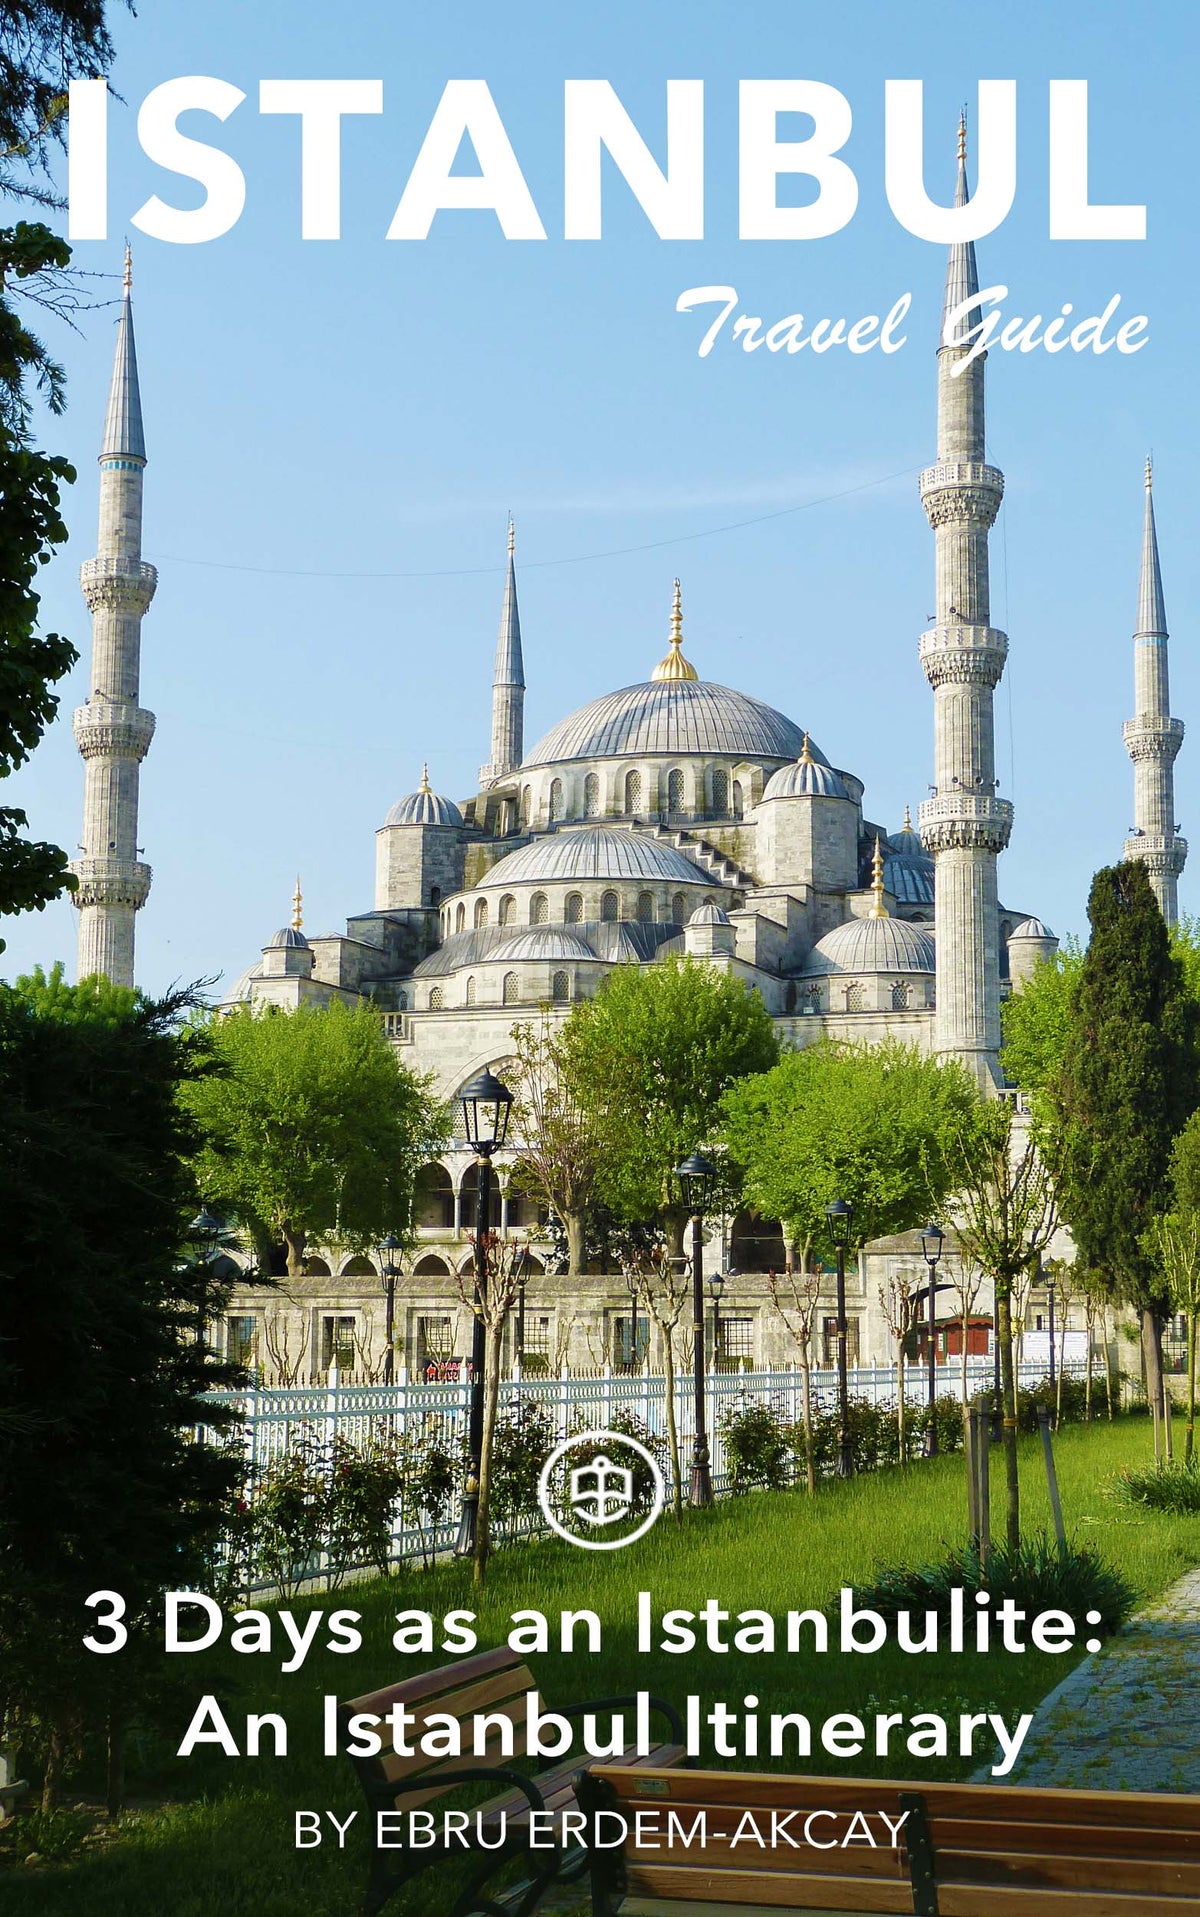 3 Days as an Istanbulite: An Istanbul Itinerary